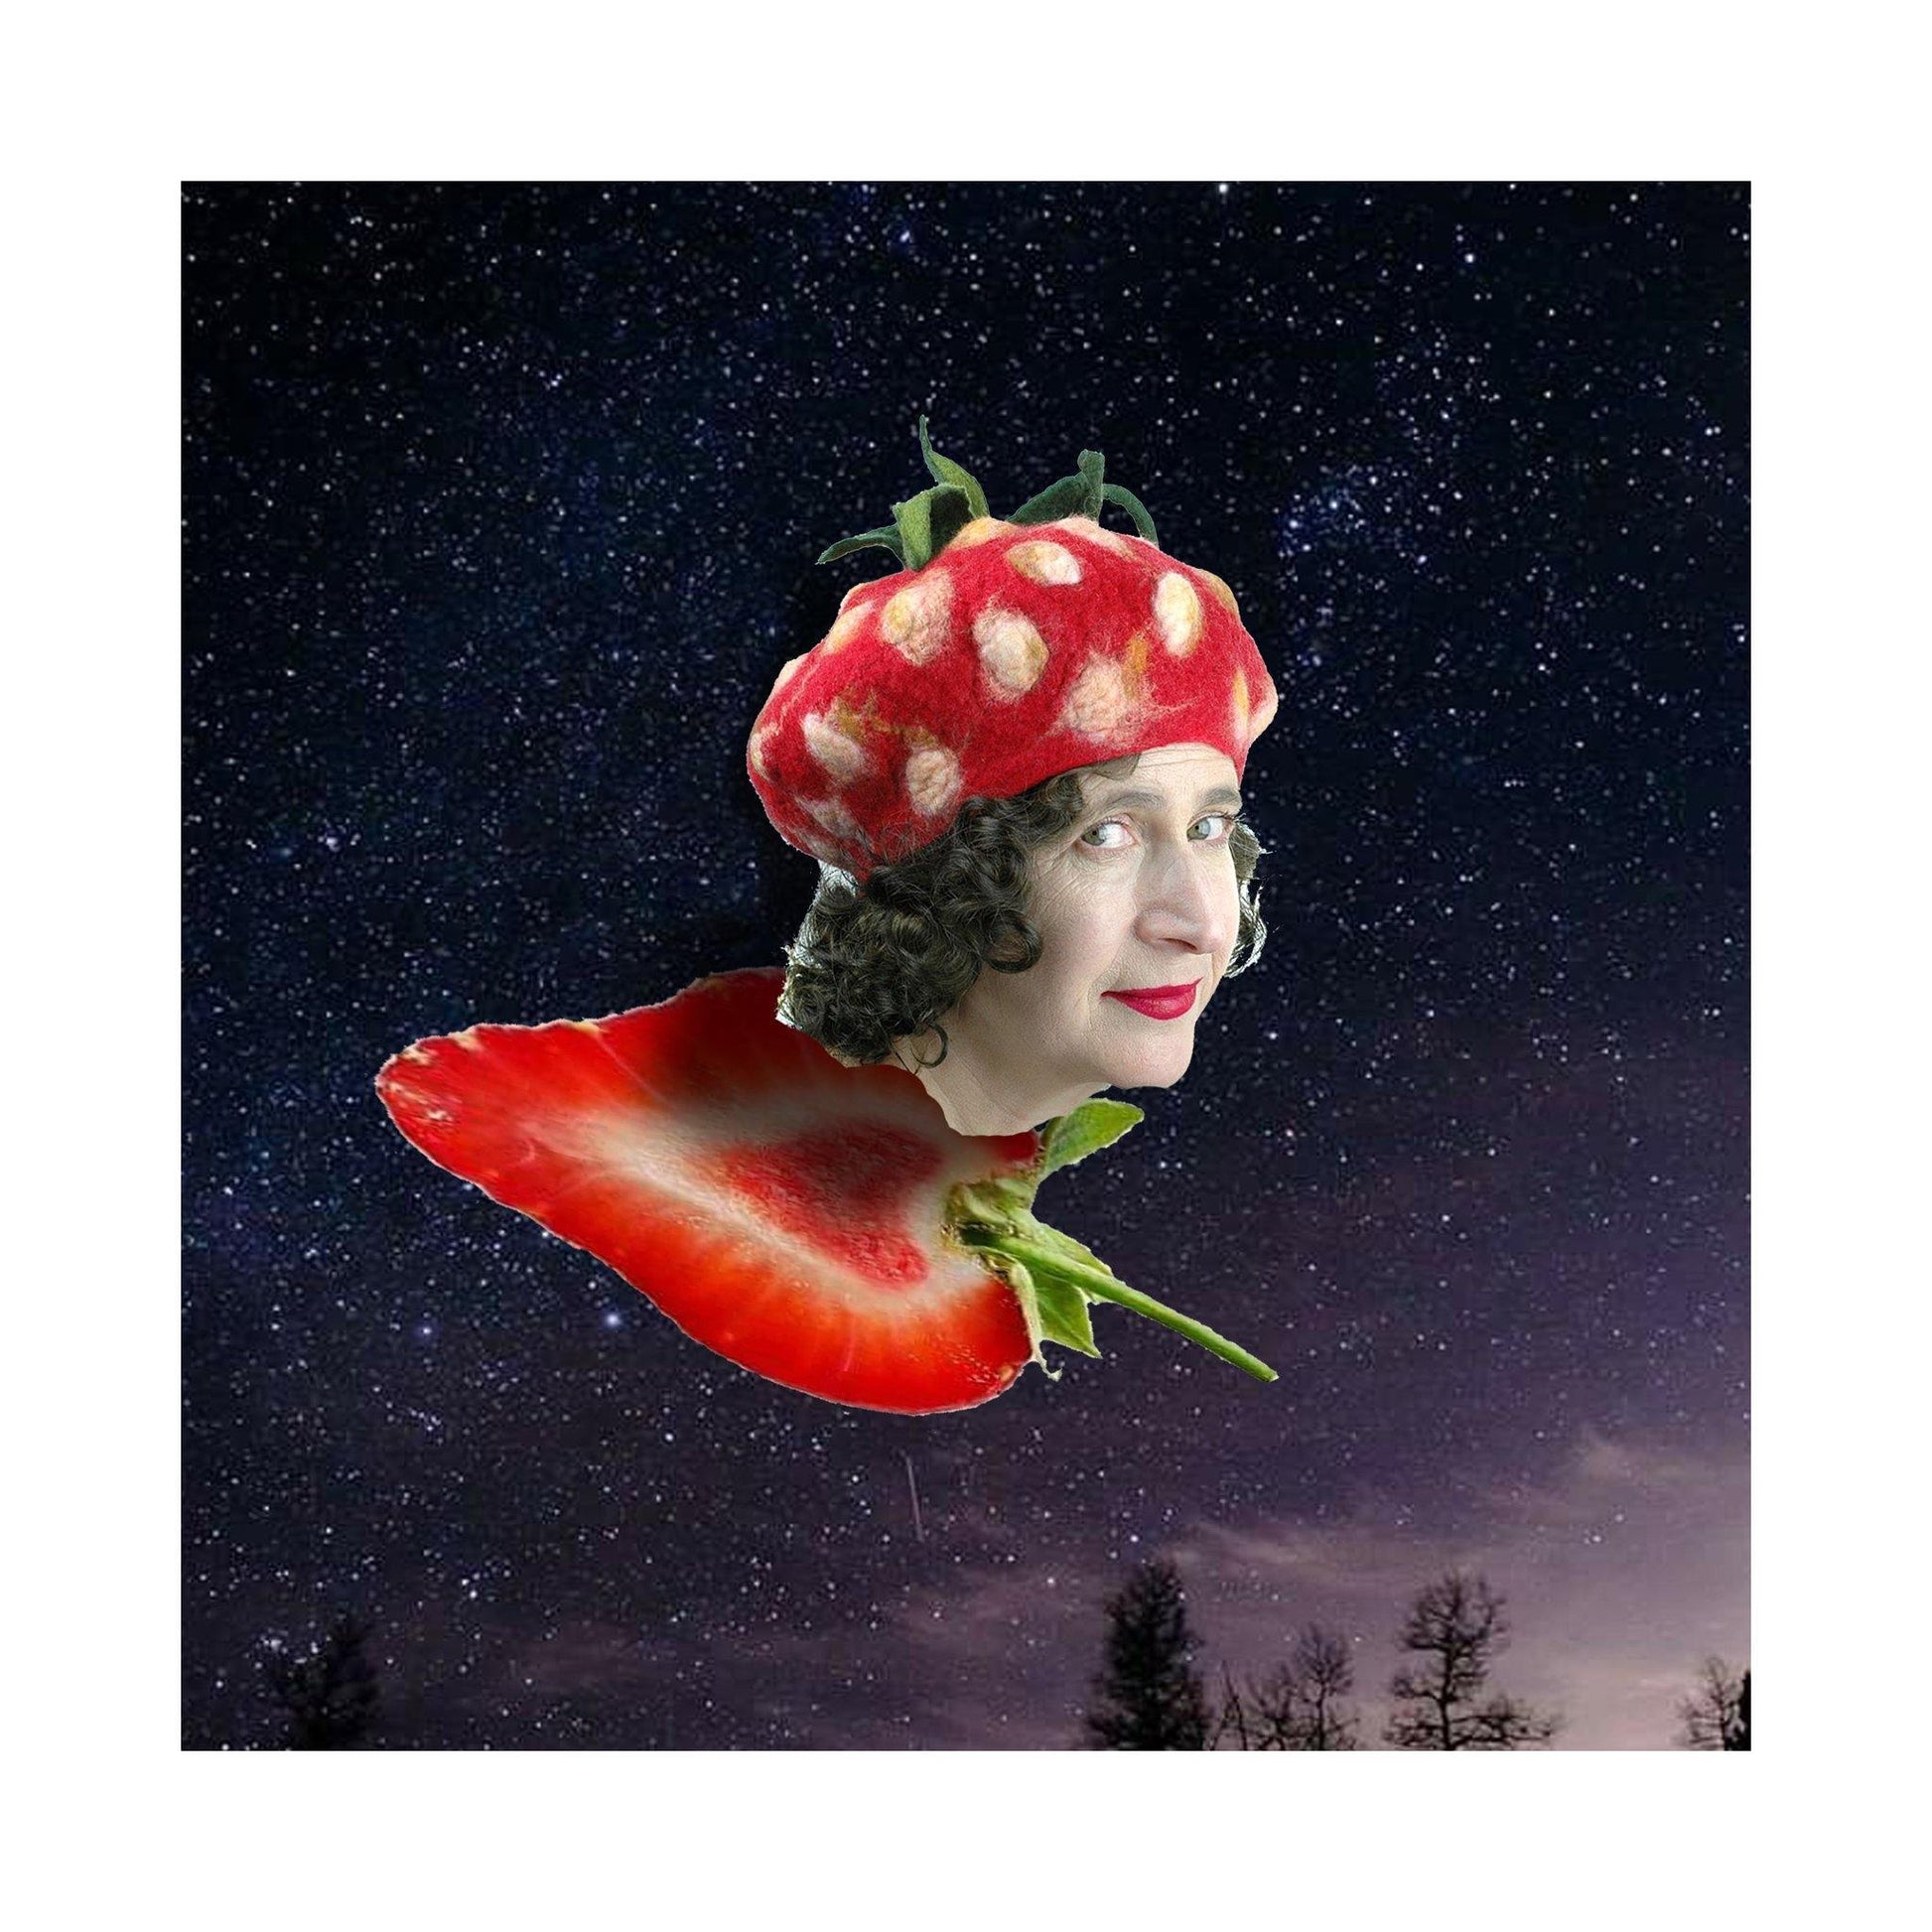 Collage of Strawberry Beret flying on a strawberry broom against a starry night sky.